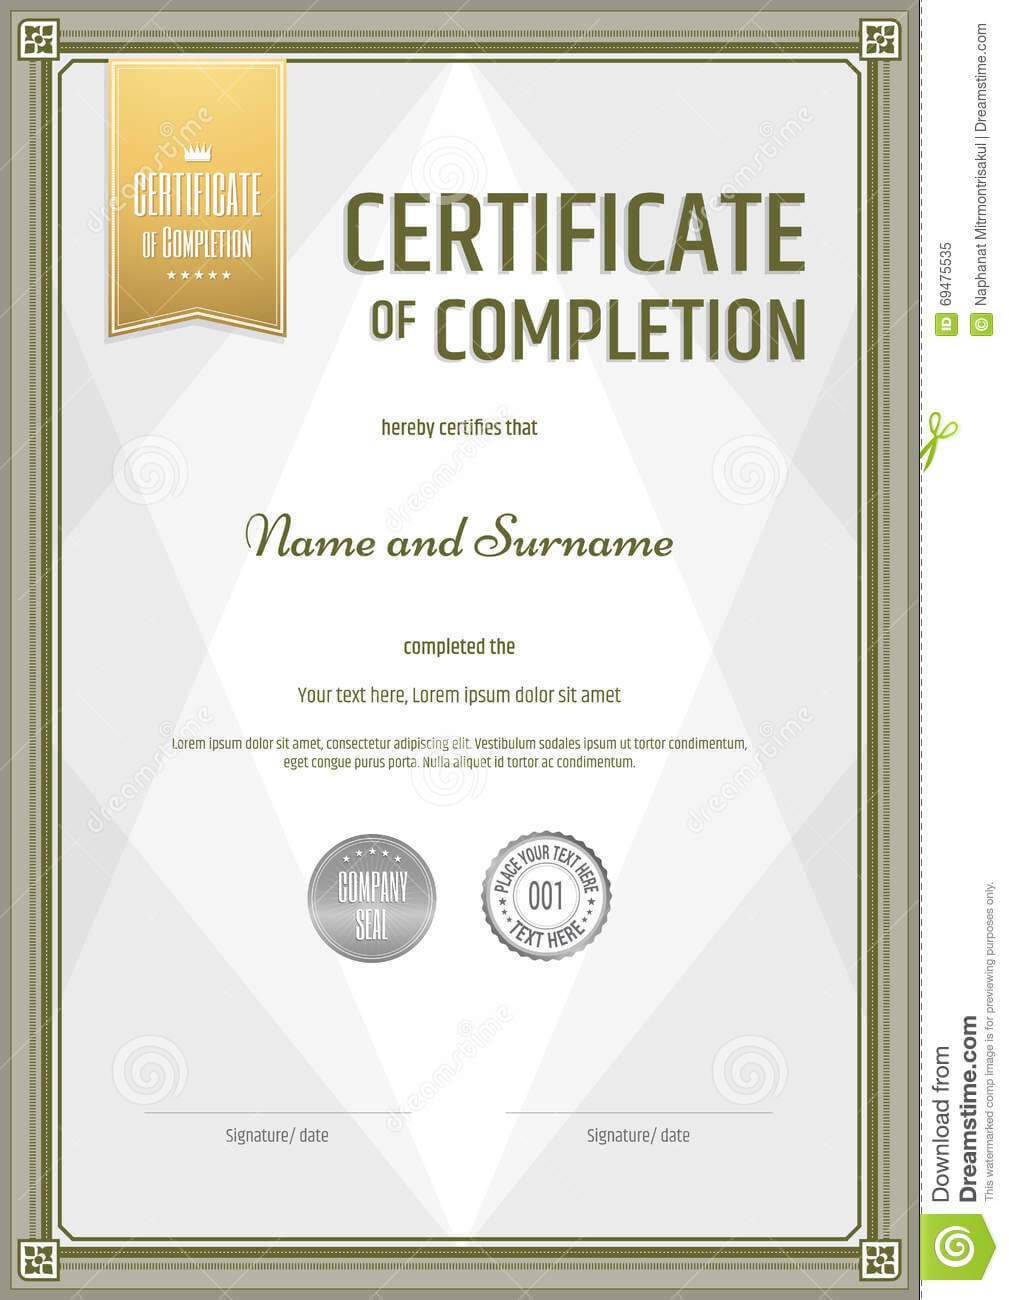 Certificate Of Completion Template In Portrait Stock Vector Pertaining To Certification Of Completion Template